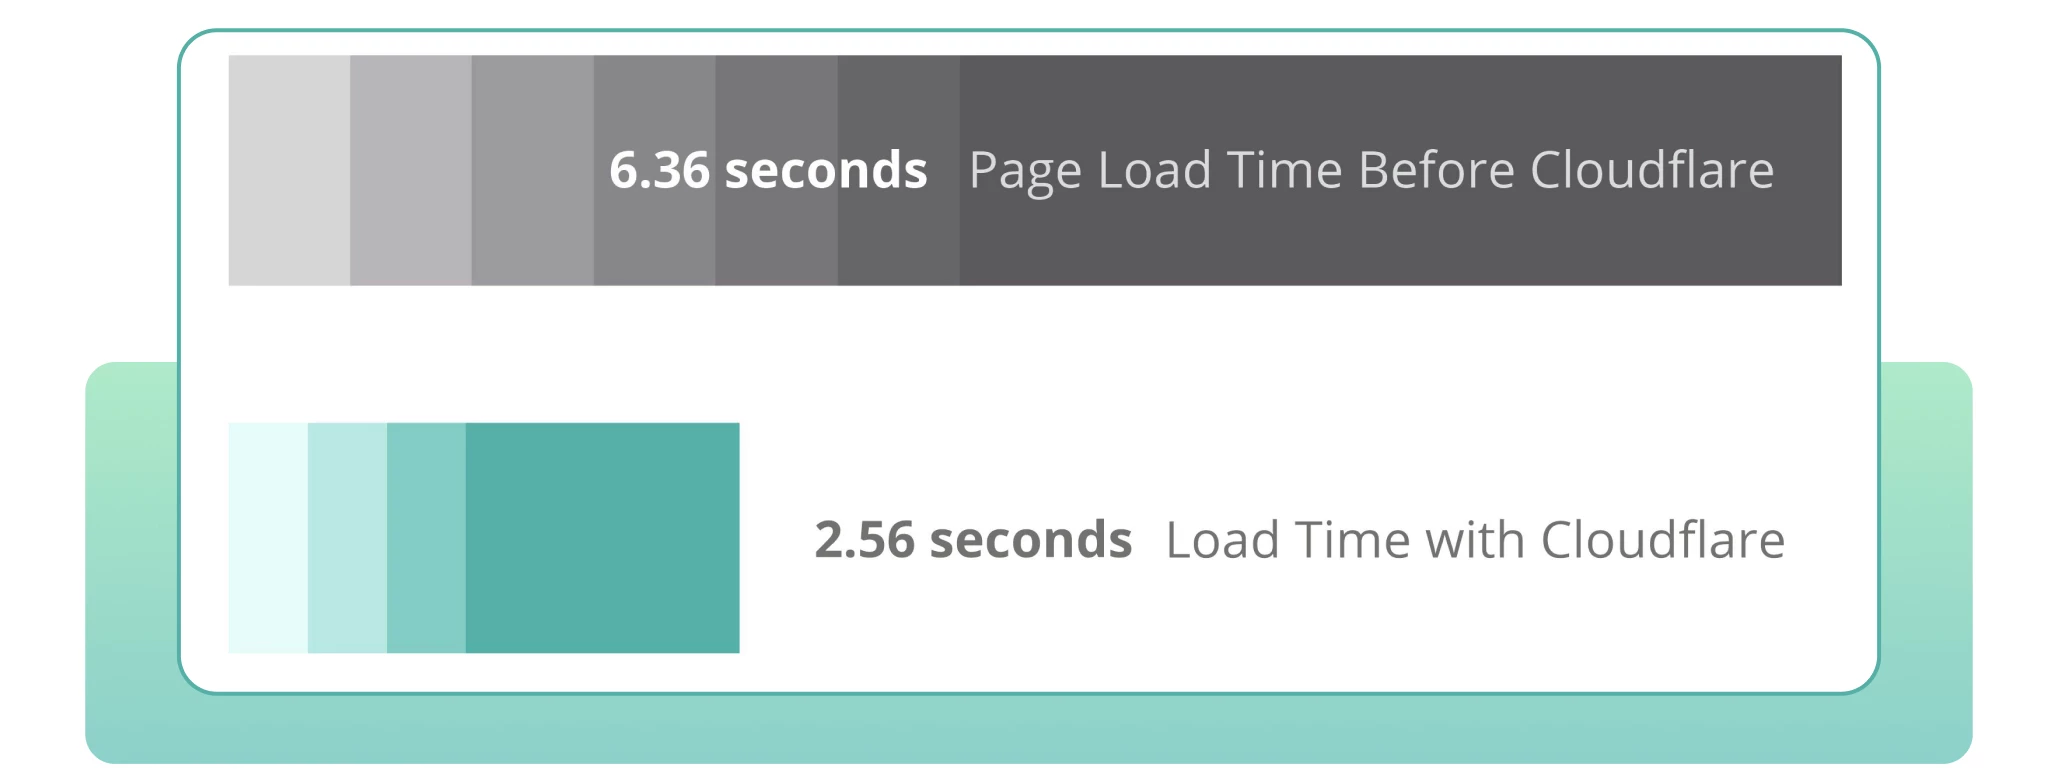 The average loading speed of such a website was 6.36 seconds